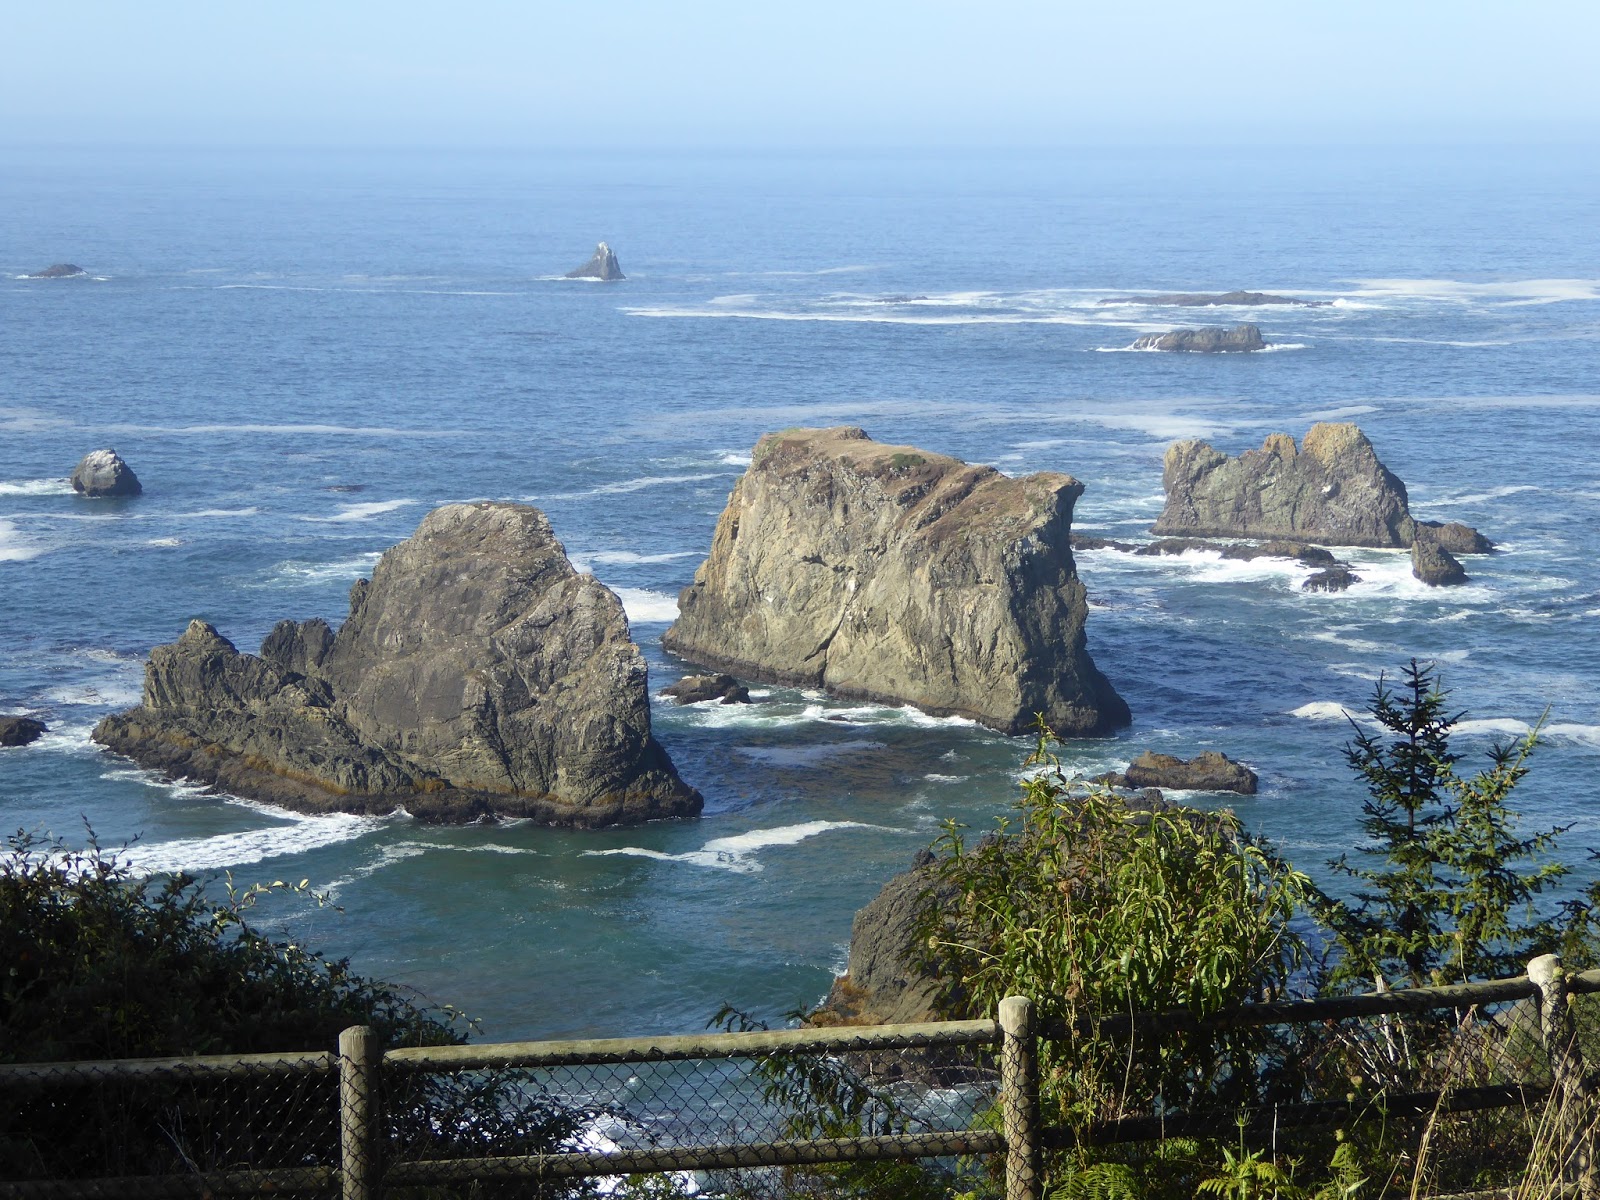 Riding the USA: Gold Beach,OR to Crescent City, CA -what a day